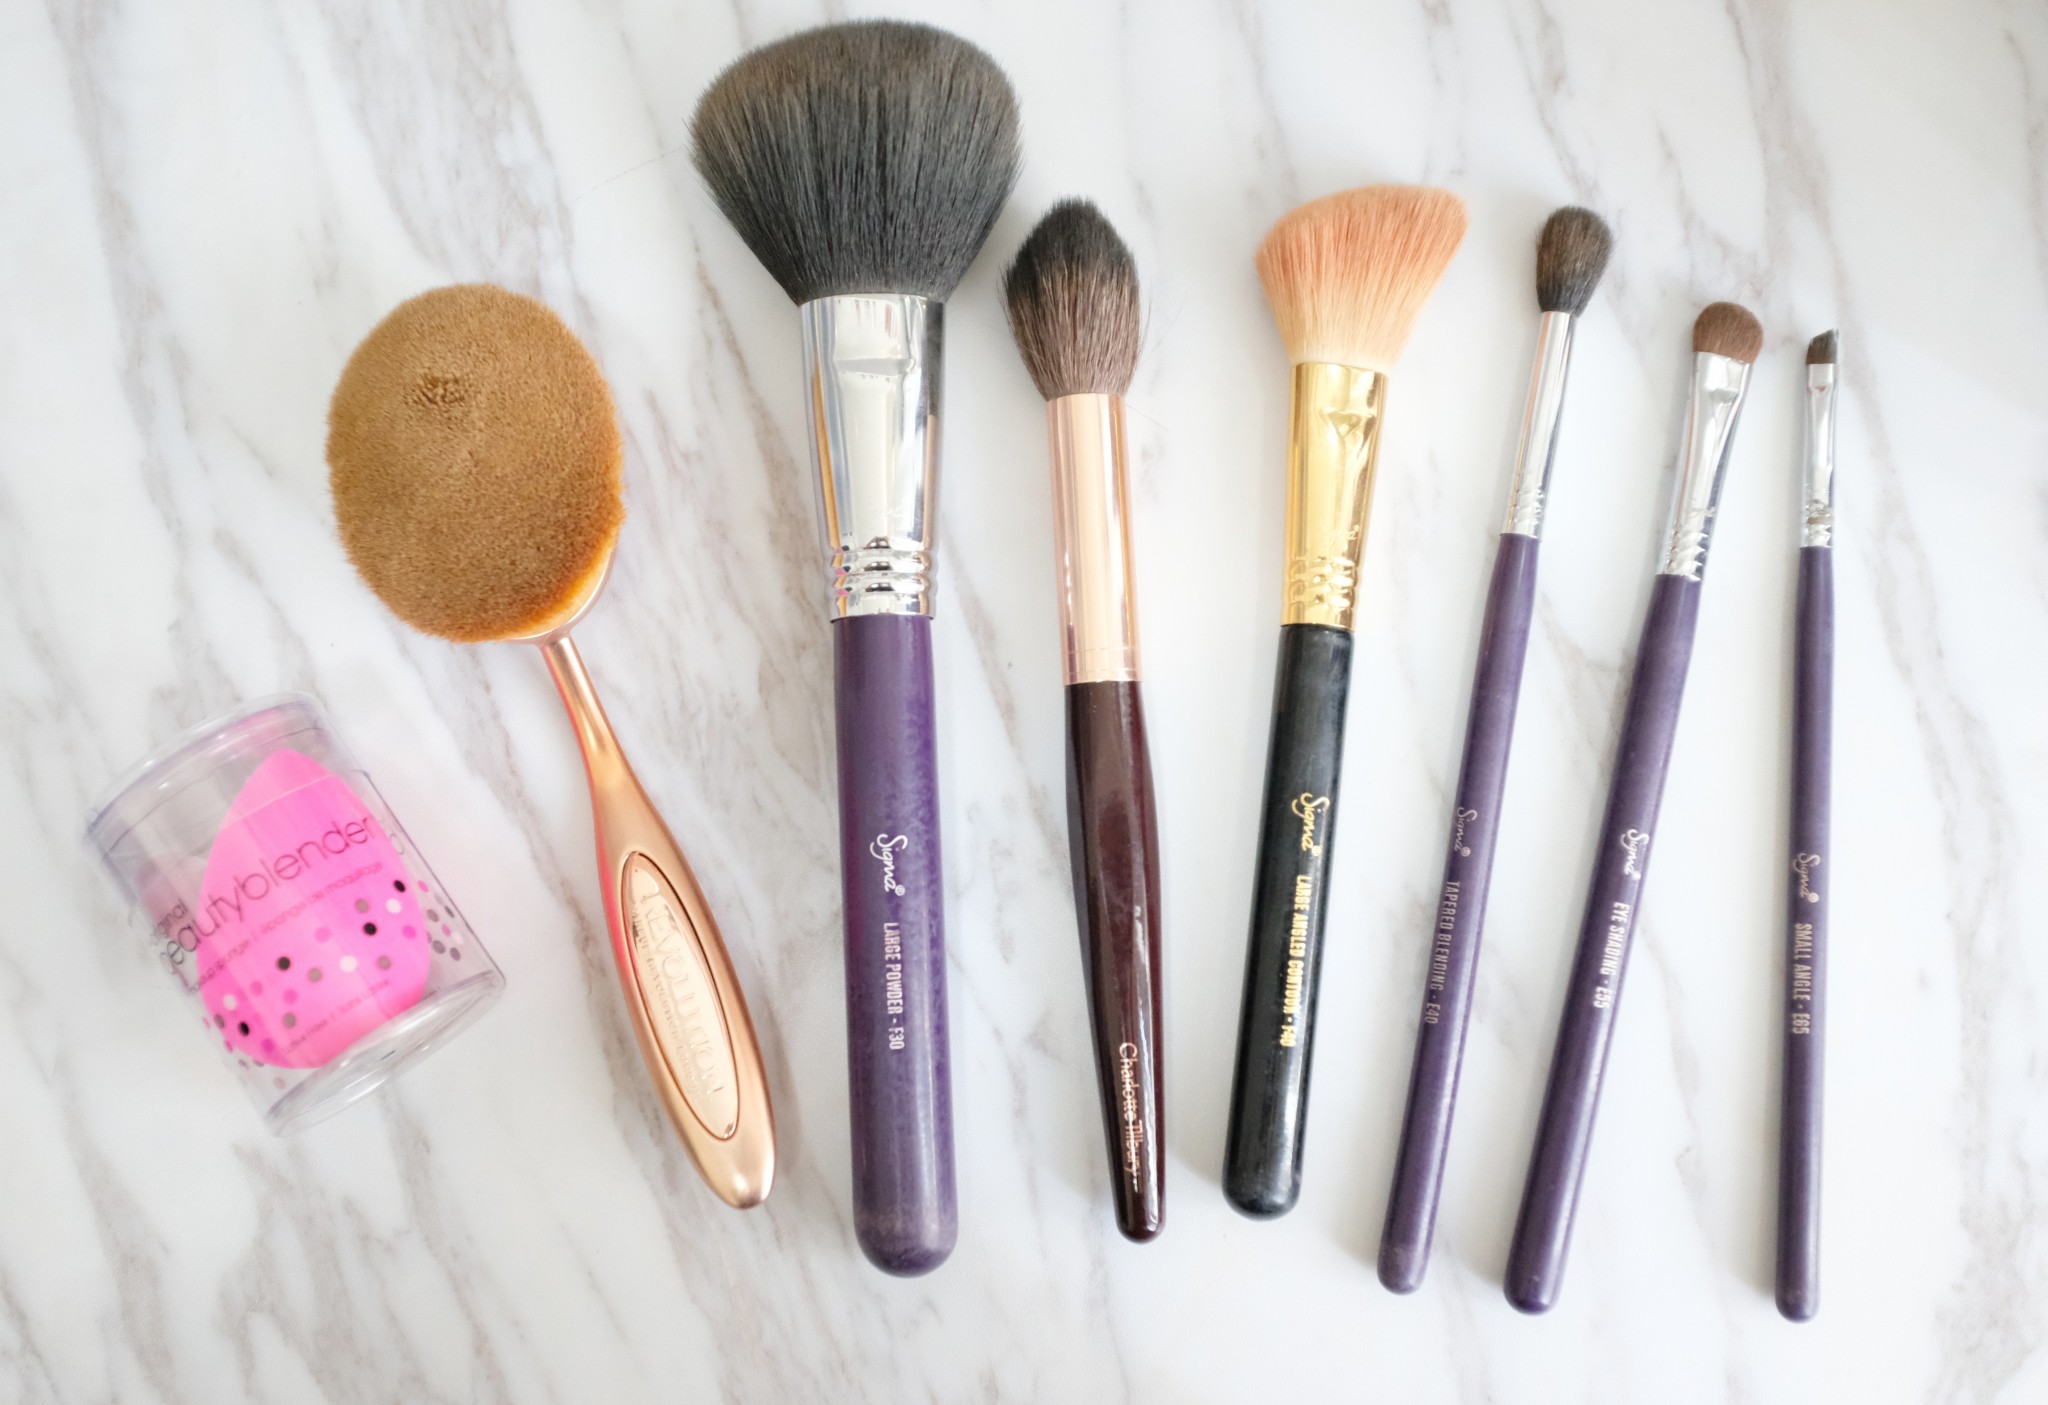 The Makeup Tools that I Use (Almost) Everyday – The Essentials